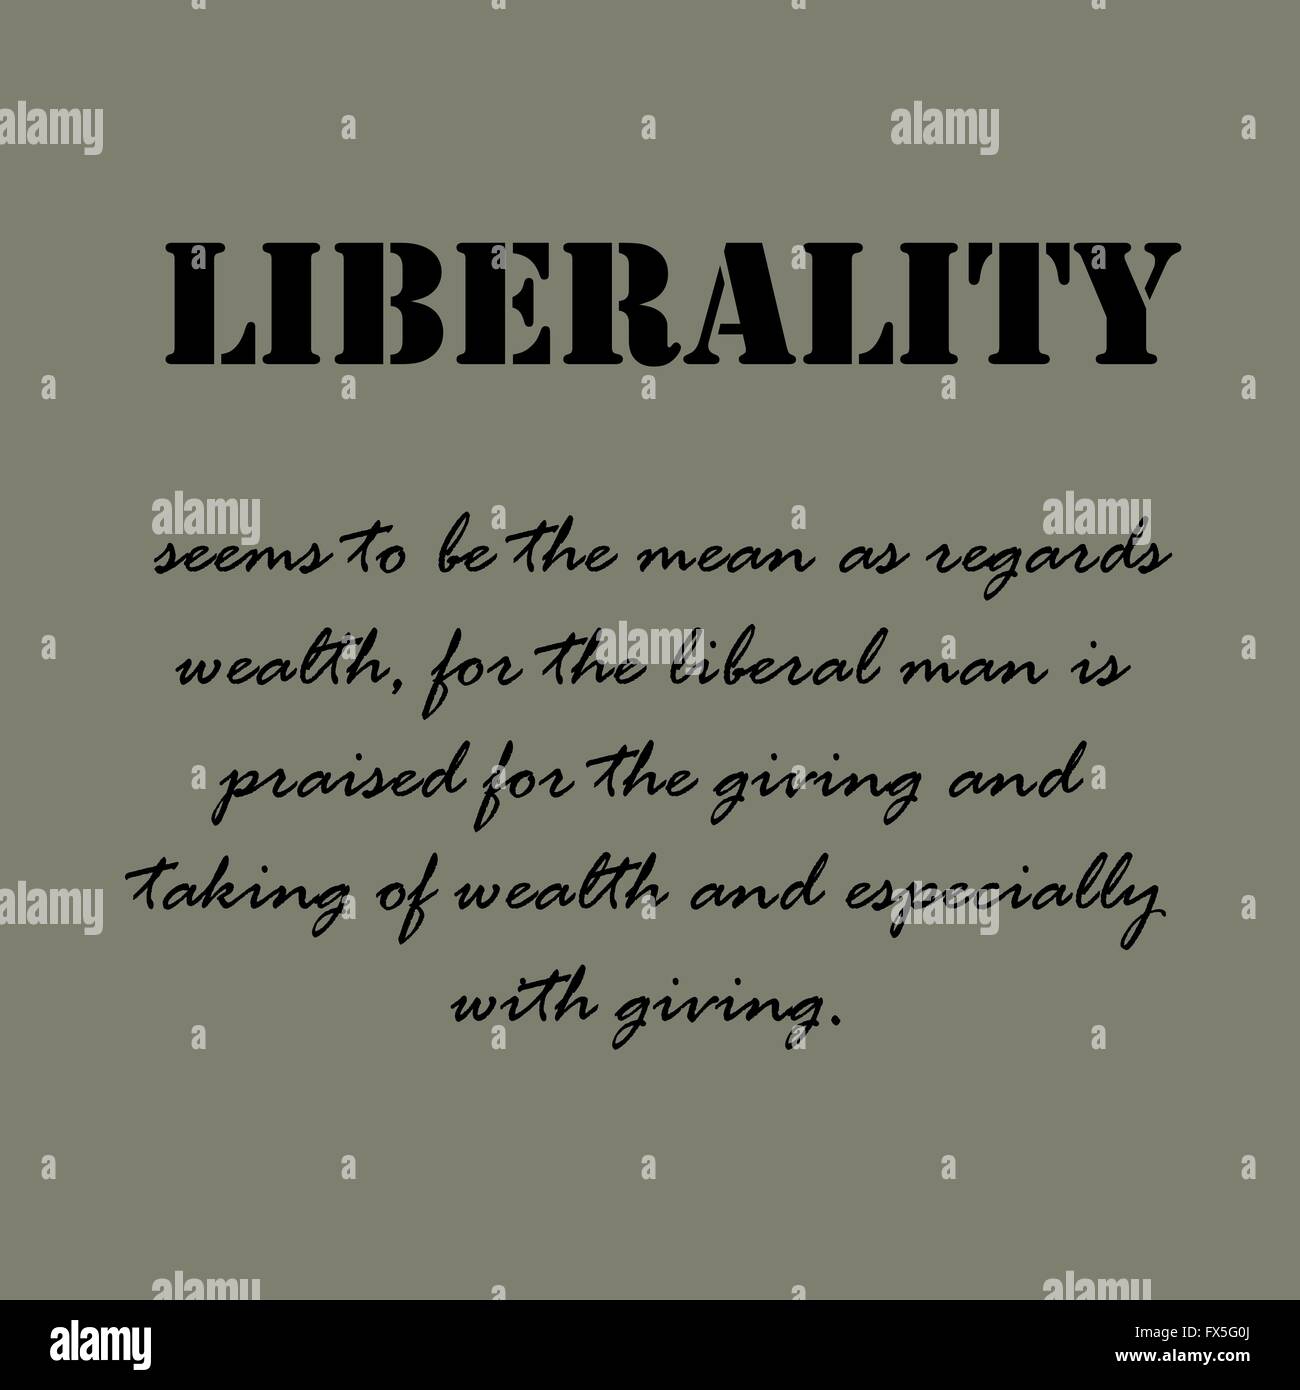 Liberality seems to be the mean as regards wealth... Text. Stock Vector